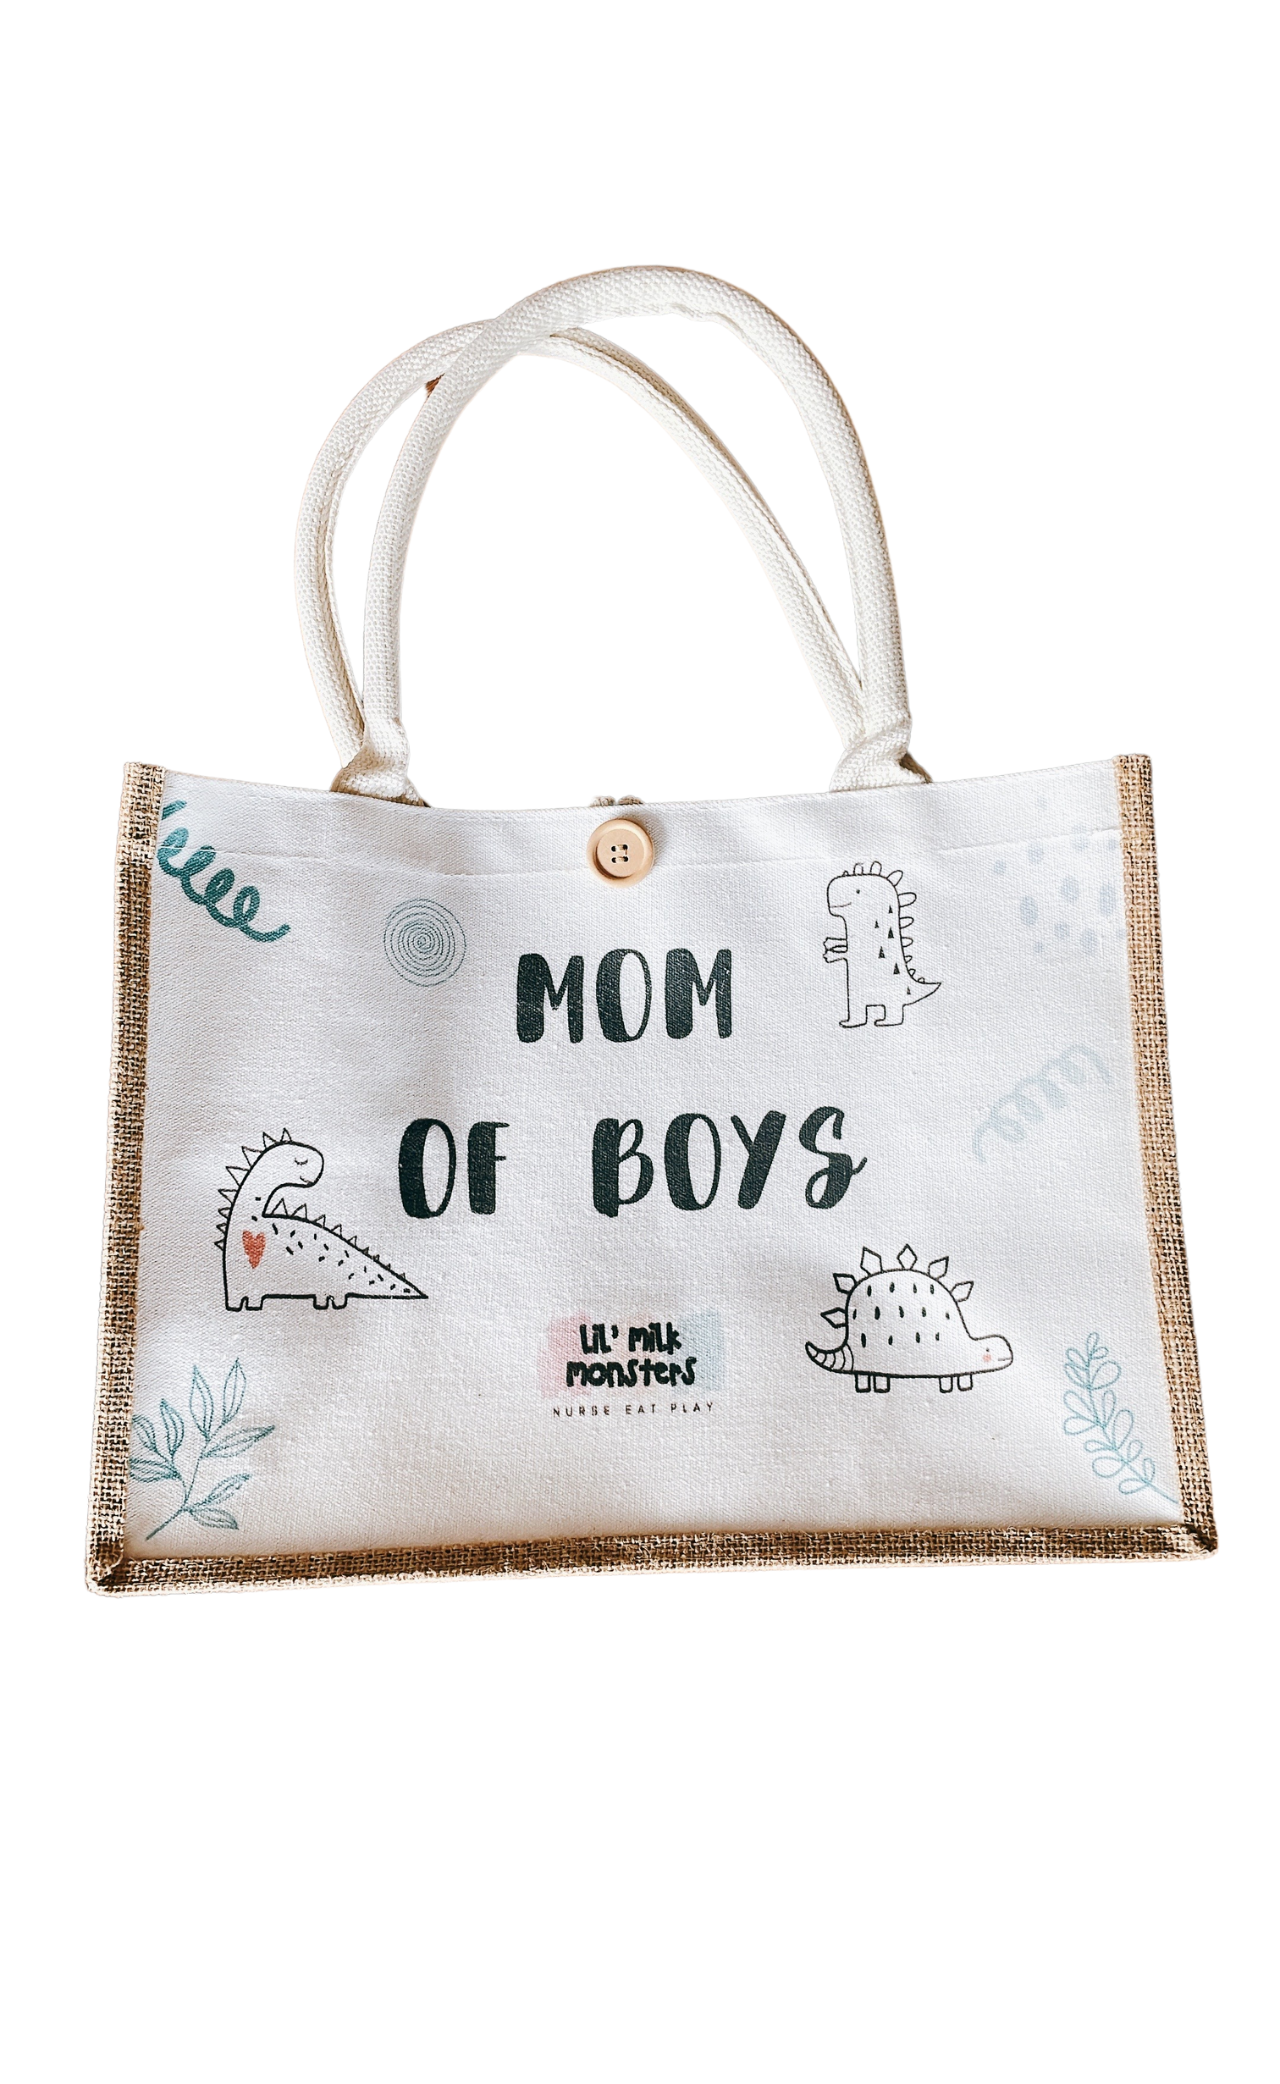 *NEW! In house printed Mom Jute Totes - MOM OF BOYS